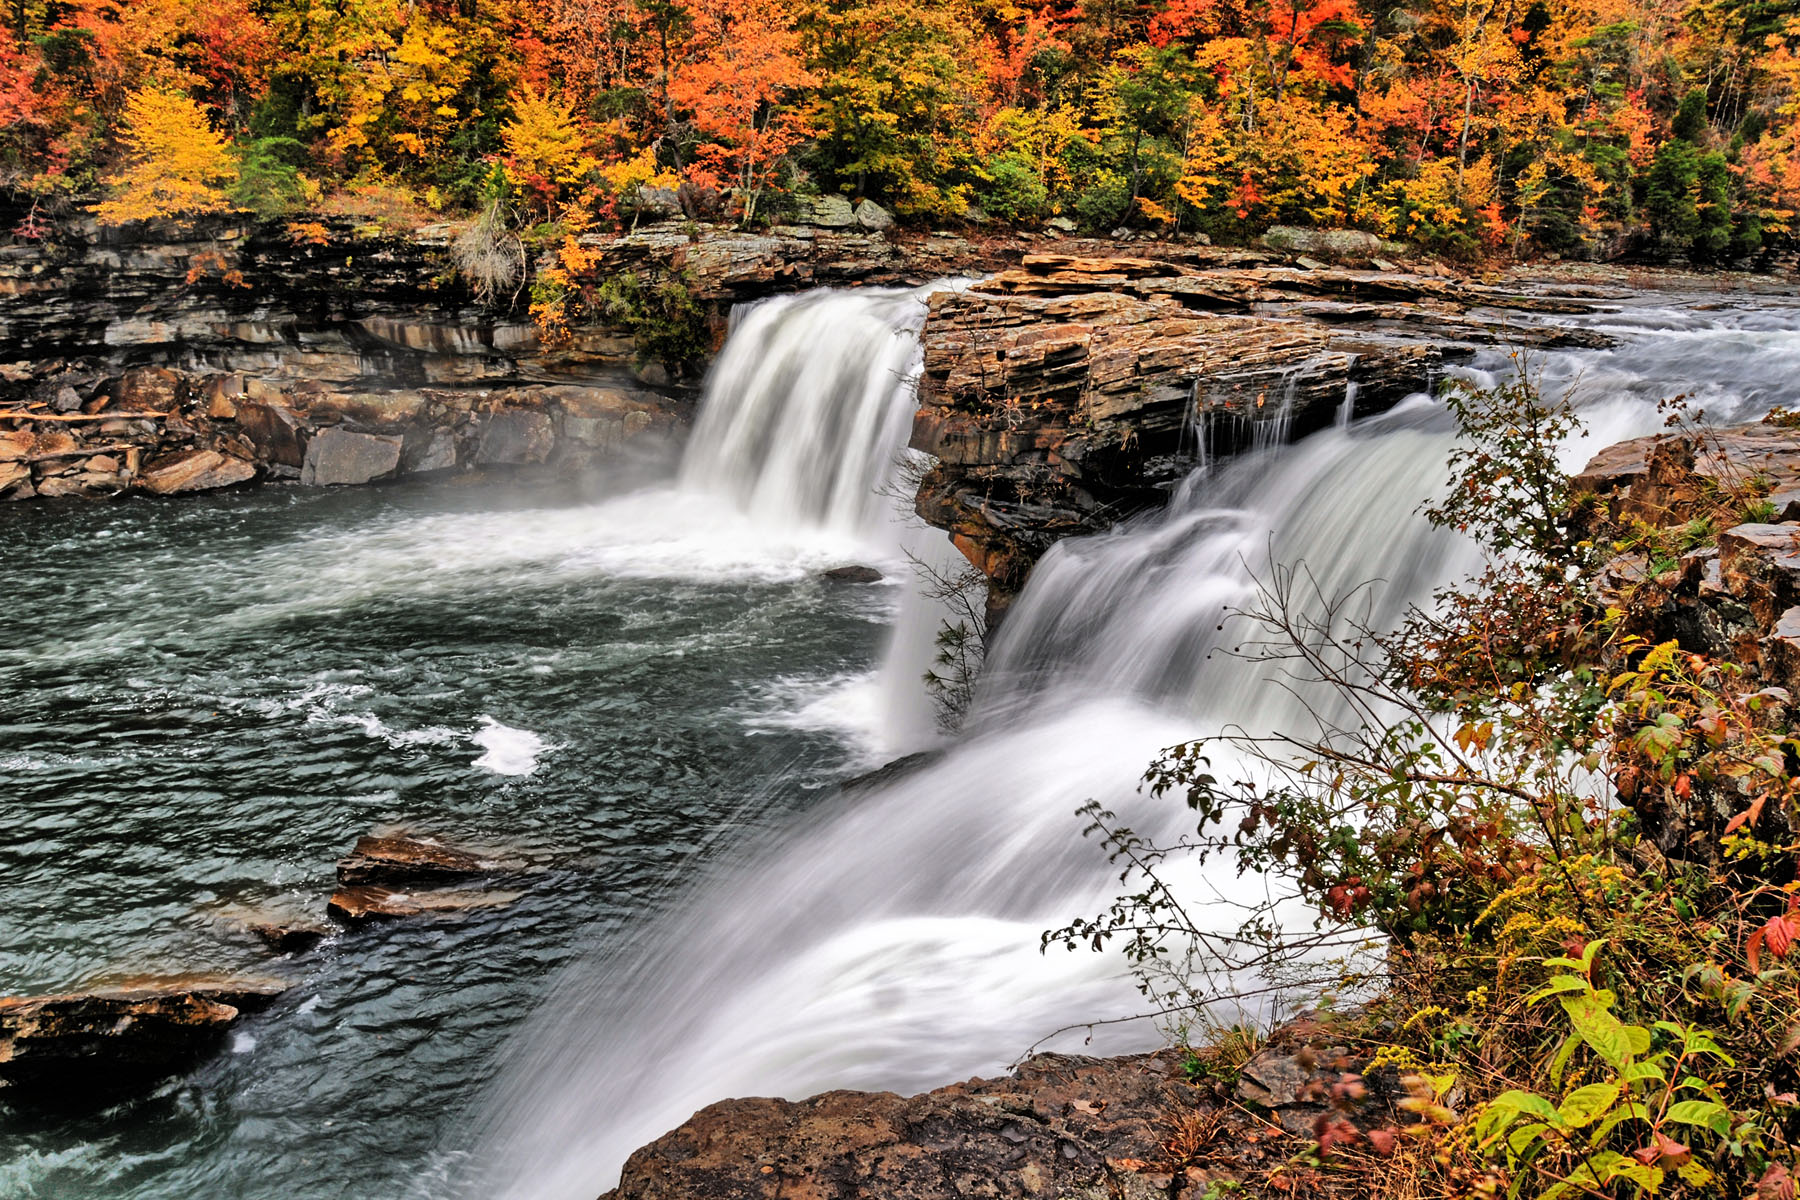 Lookin’ At Leaves: A Guide to a Fall Scenic Drive at Little River Canyon